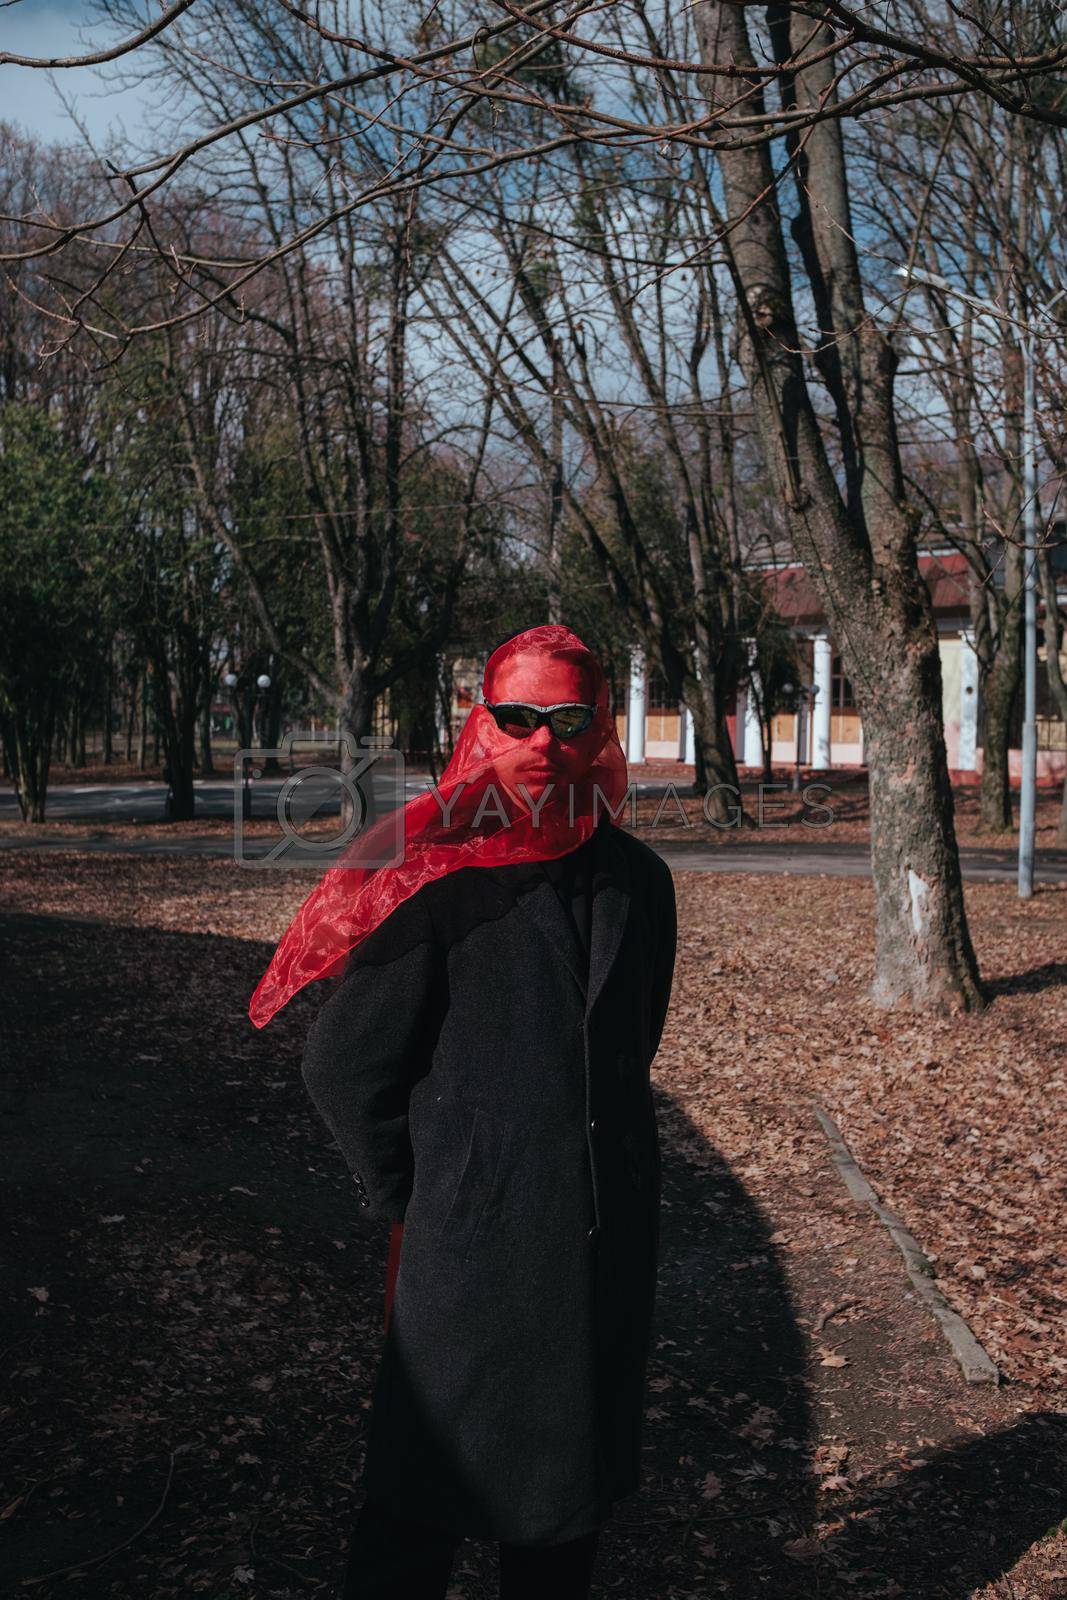 Superhero man with red mask and sunglasses fashion fighter in the park